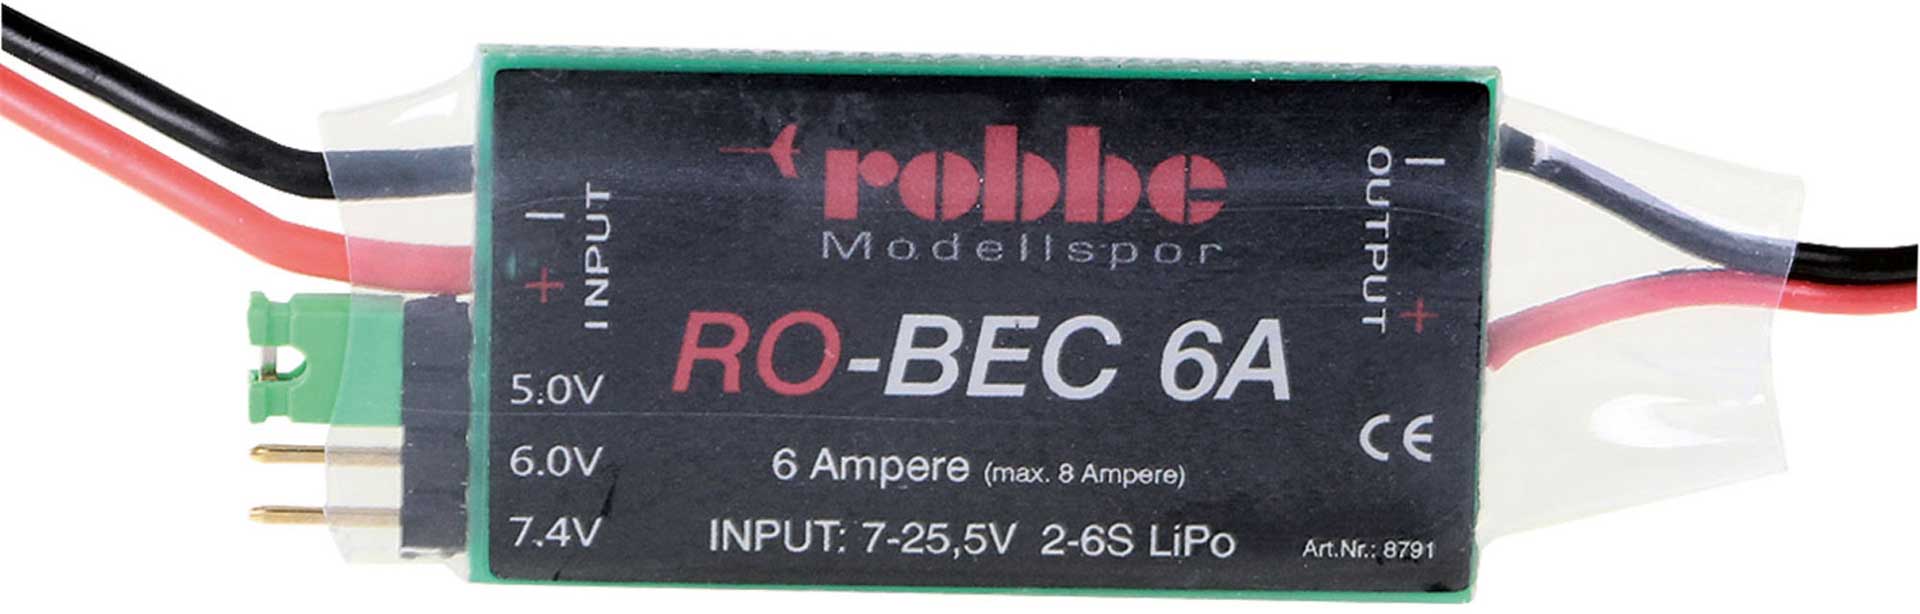 Robbe Modellsport RO-BEC 6A RECEIVER POWER SUPPLY